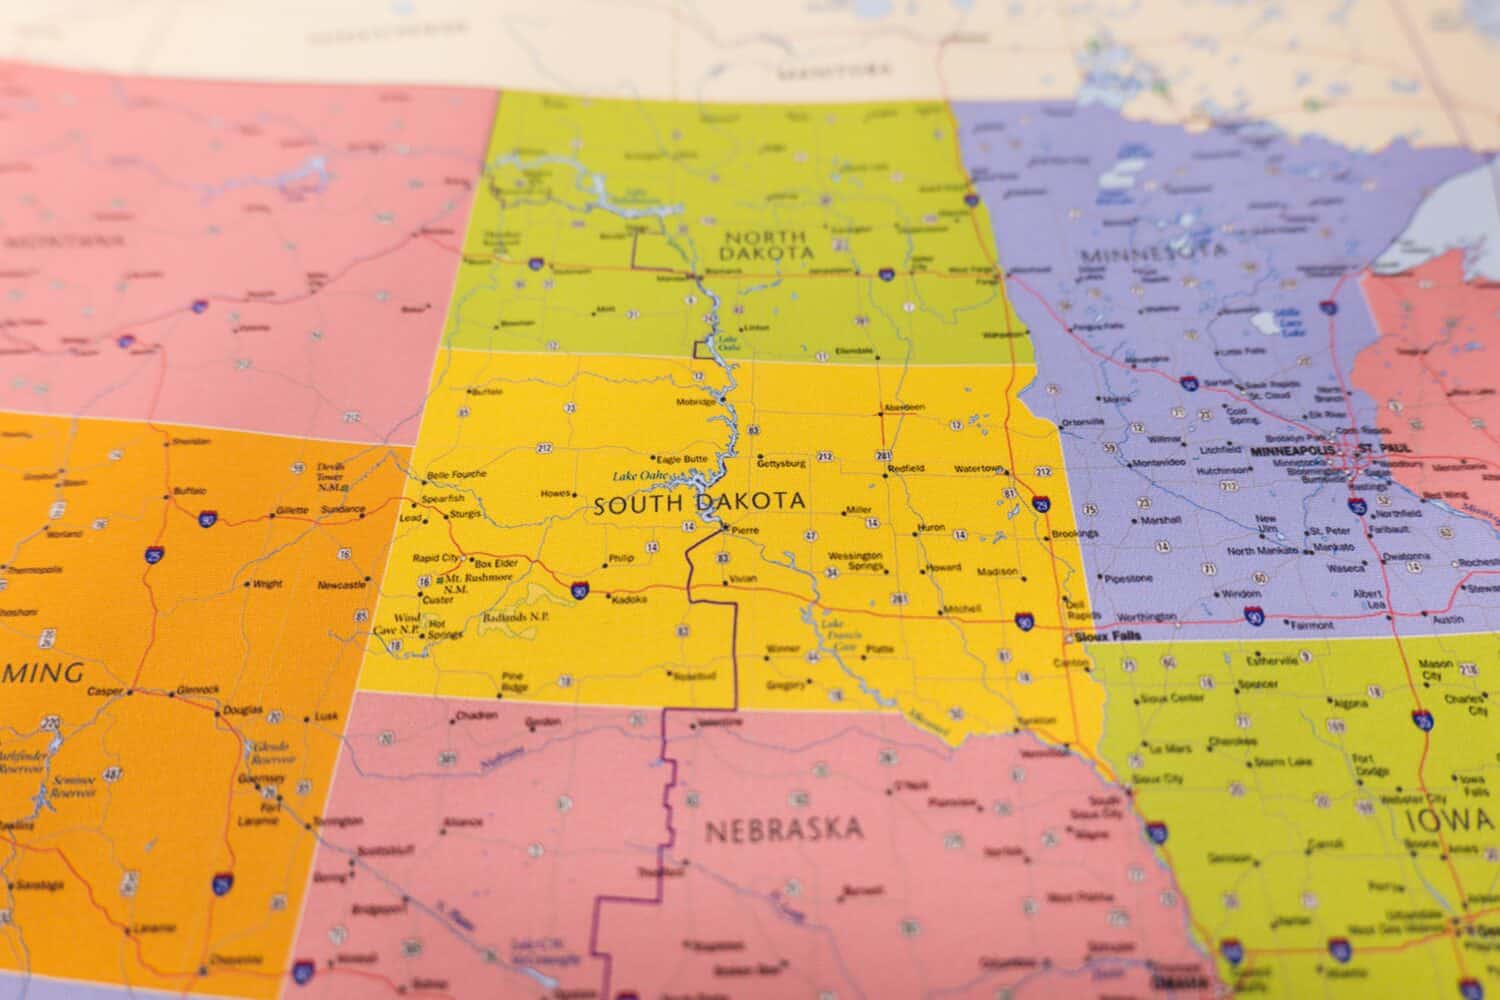 South Dakota state on the map. Discover the South Dakota state through this Map. Map of the South Dakota state with selective focus on state name